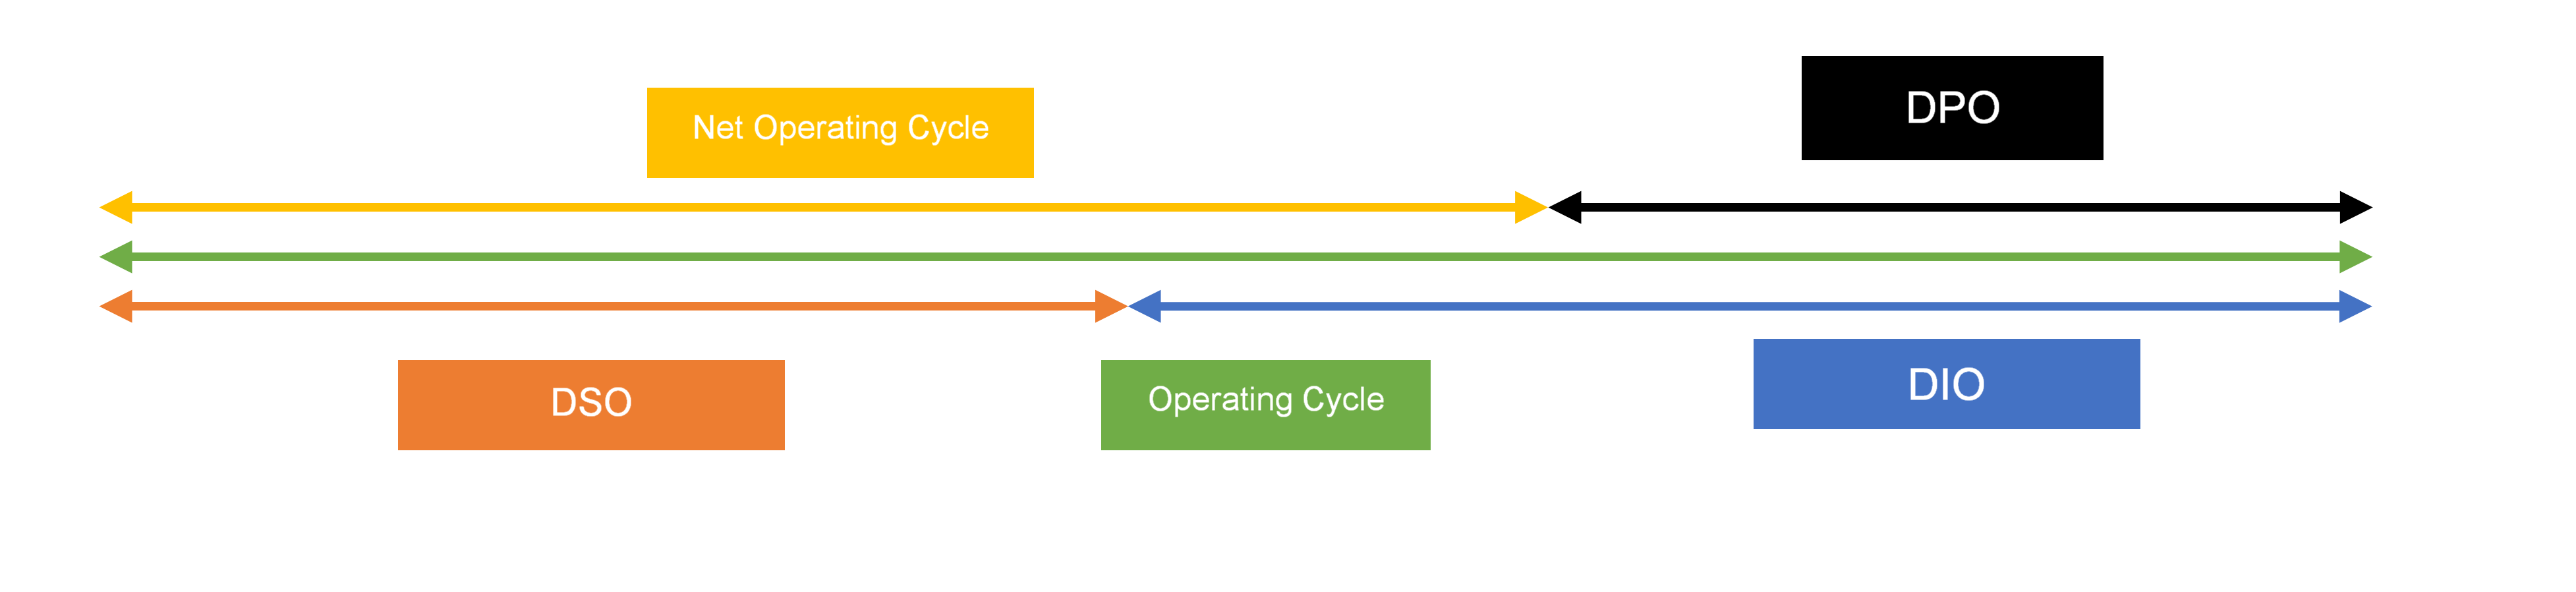 Net Operating Cycle